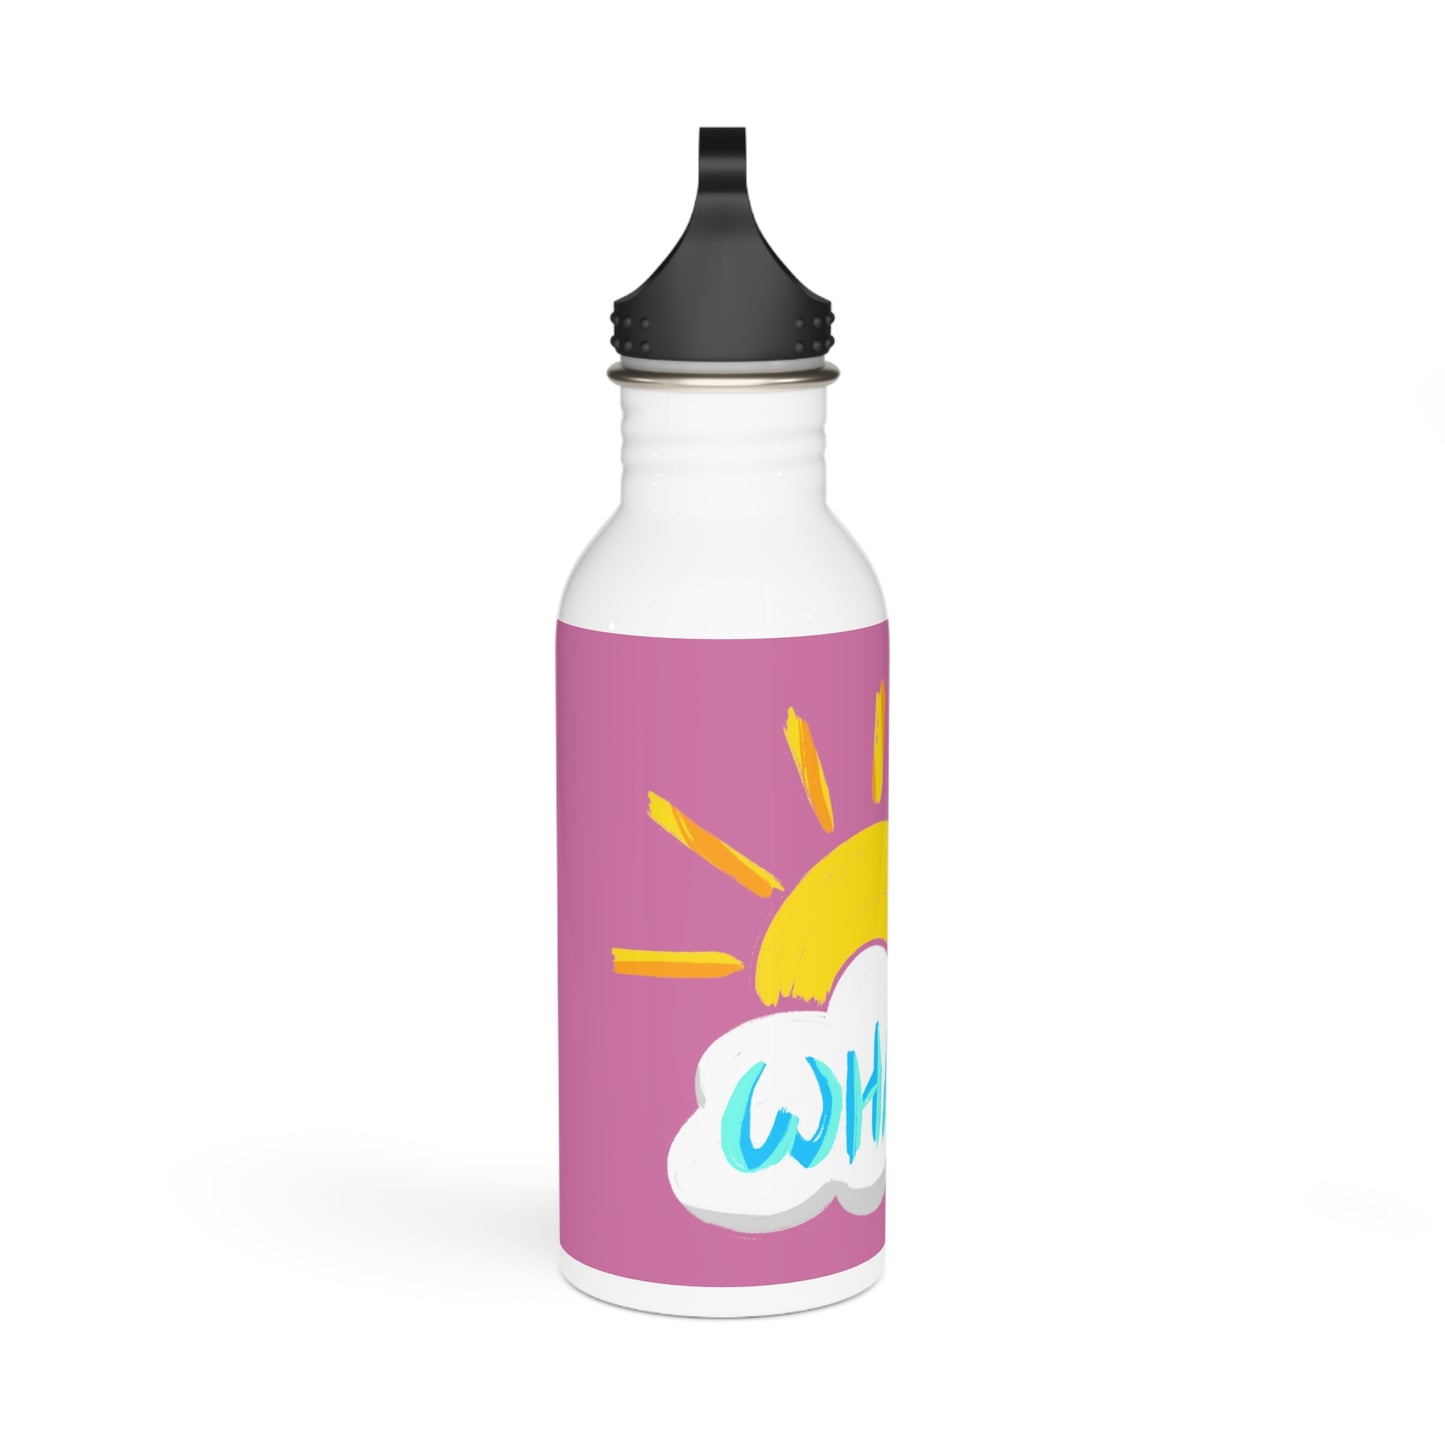 "What If?" - Stainless Steel Water Bottle